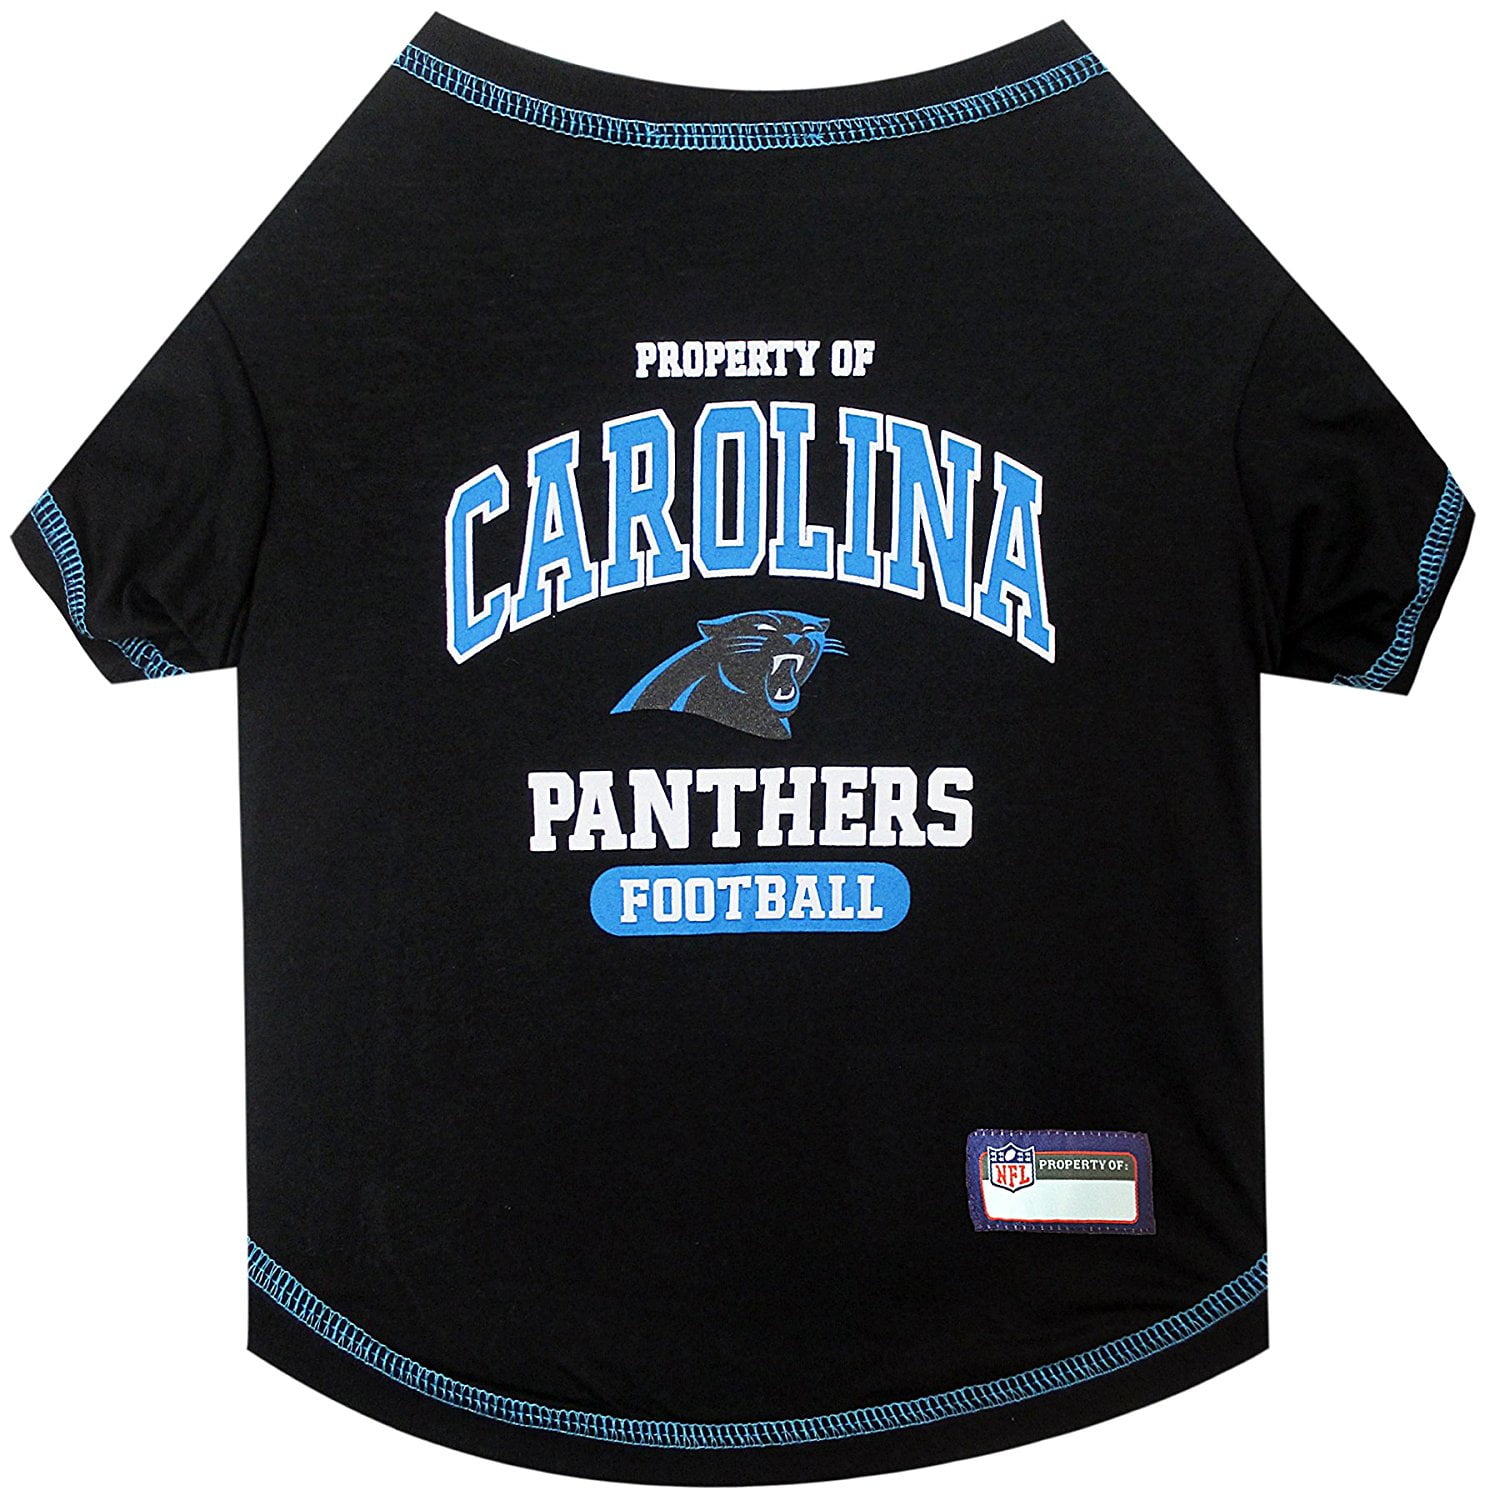 Pets First NFL Carolina Panthers Pet T-Shirt. Licensed, Wrinkle-free, Tee  Shirt for Dogs/Cats. Football Shirt